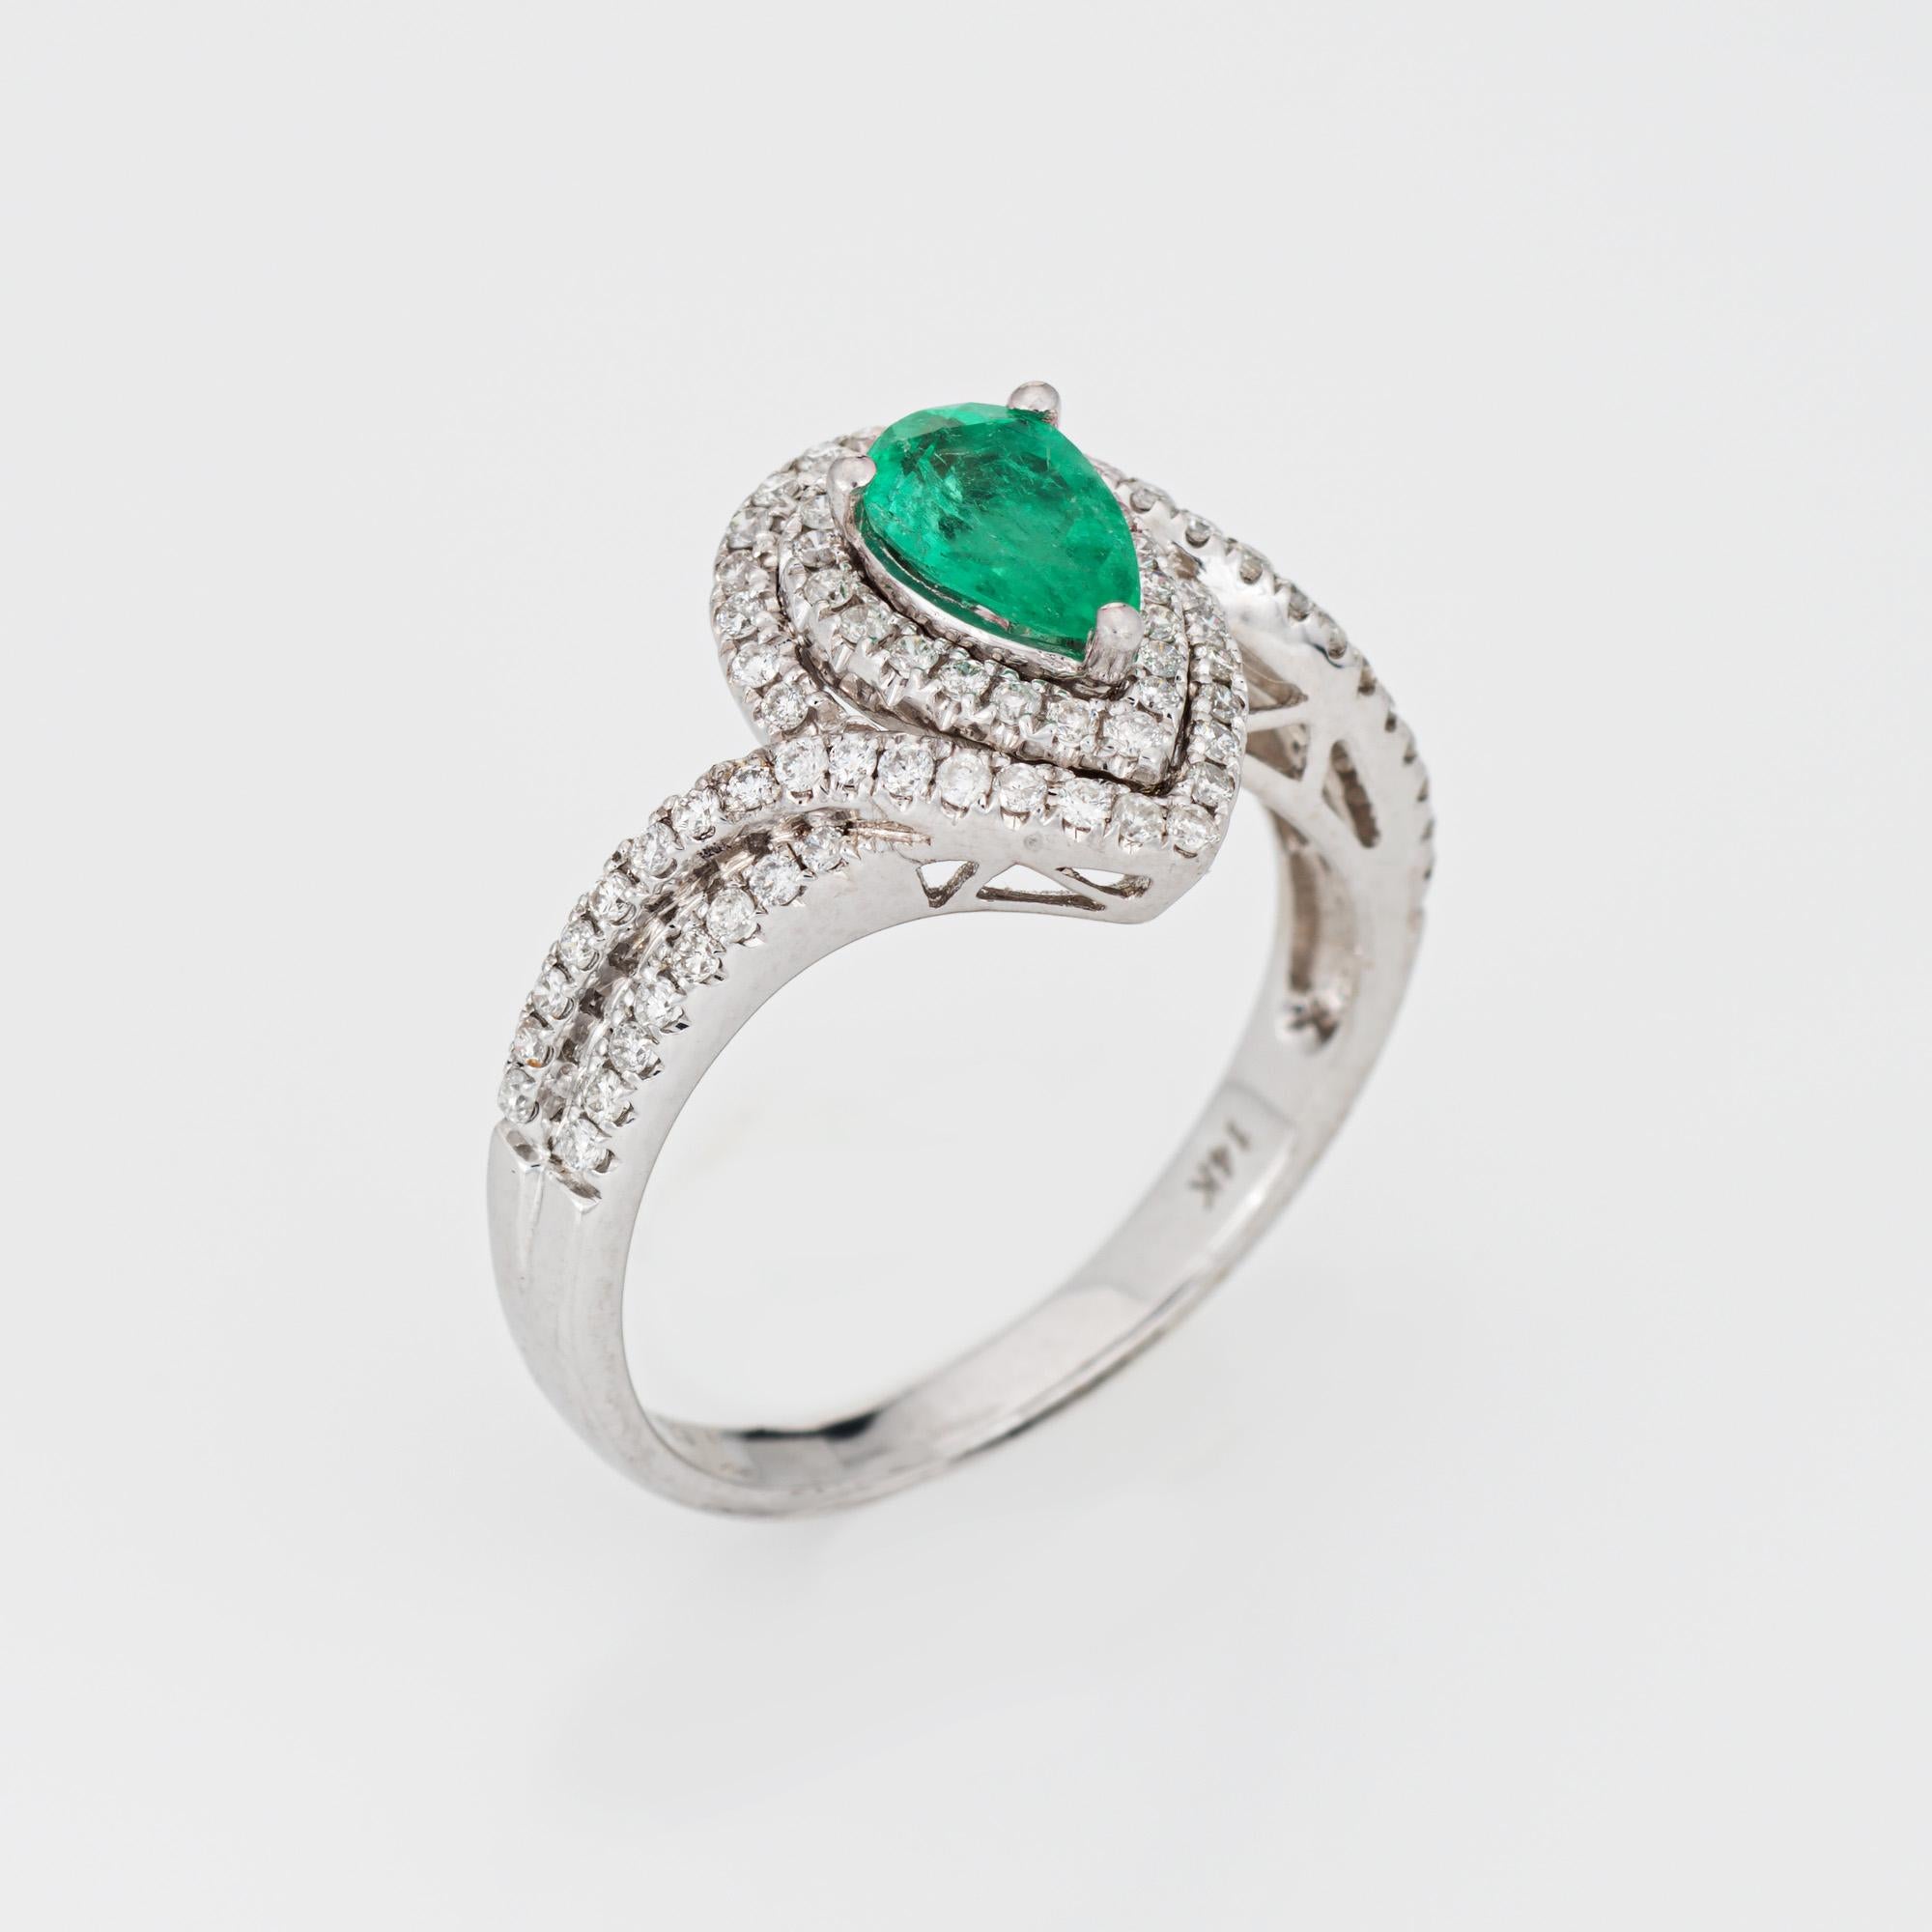 Stylish emerald & diamond ring crafted in 14 karat white gold. 

Pear cut emerald is estimated at 0.40 carats. Diamonds total an estimated 0.51 carats (estimated at H-I color and SI2-I2 clarity). The emerald is in very good condition and free of